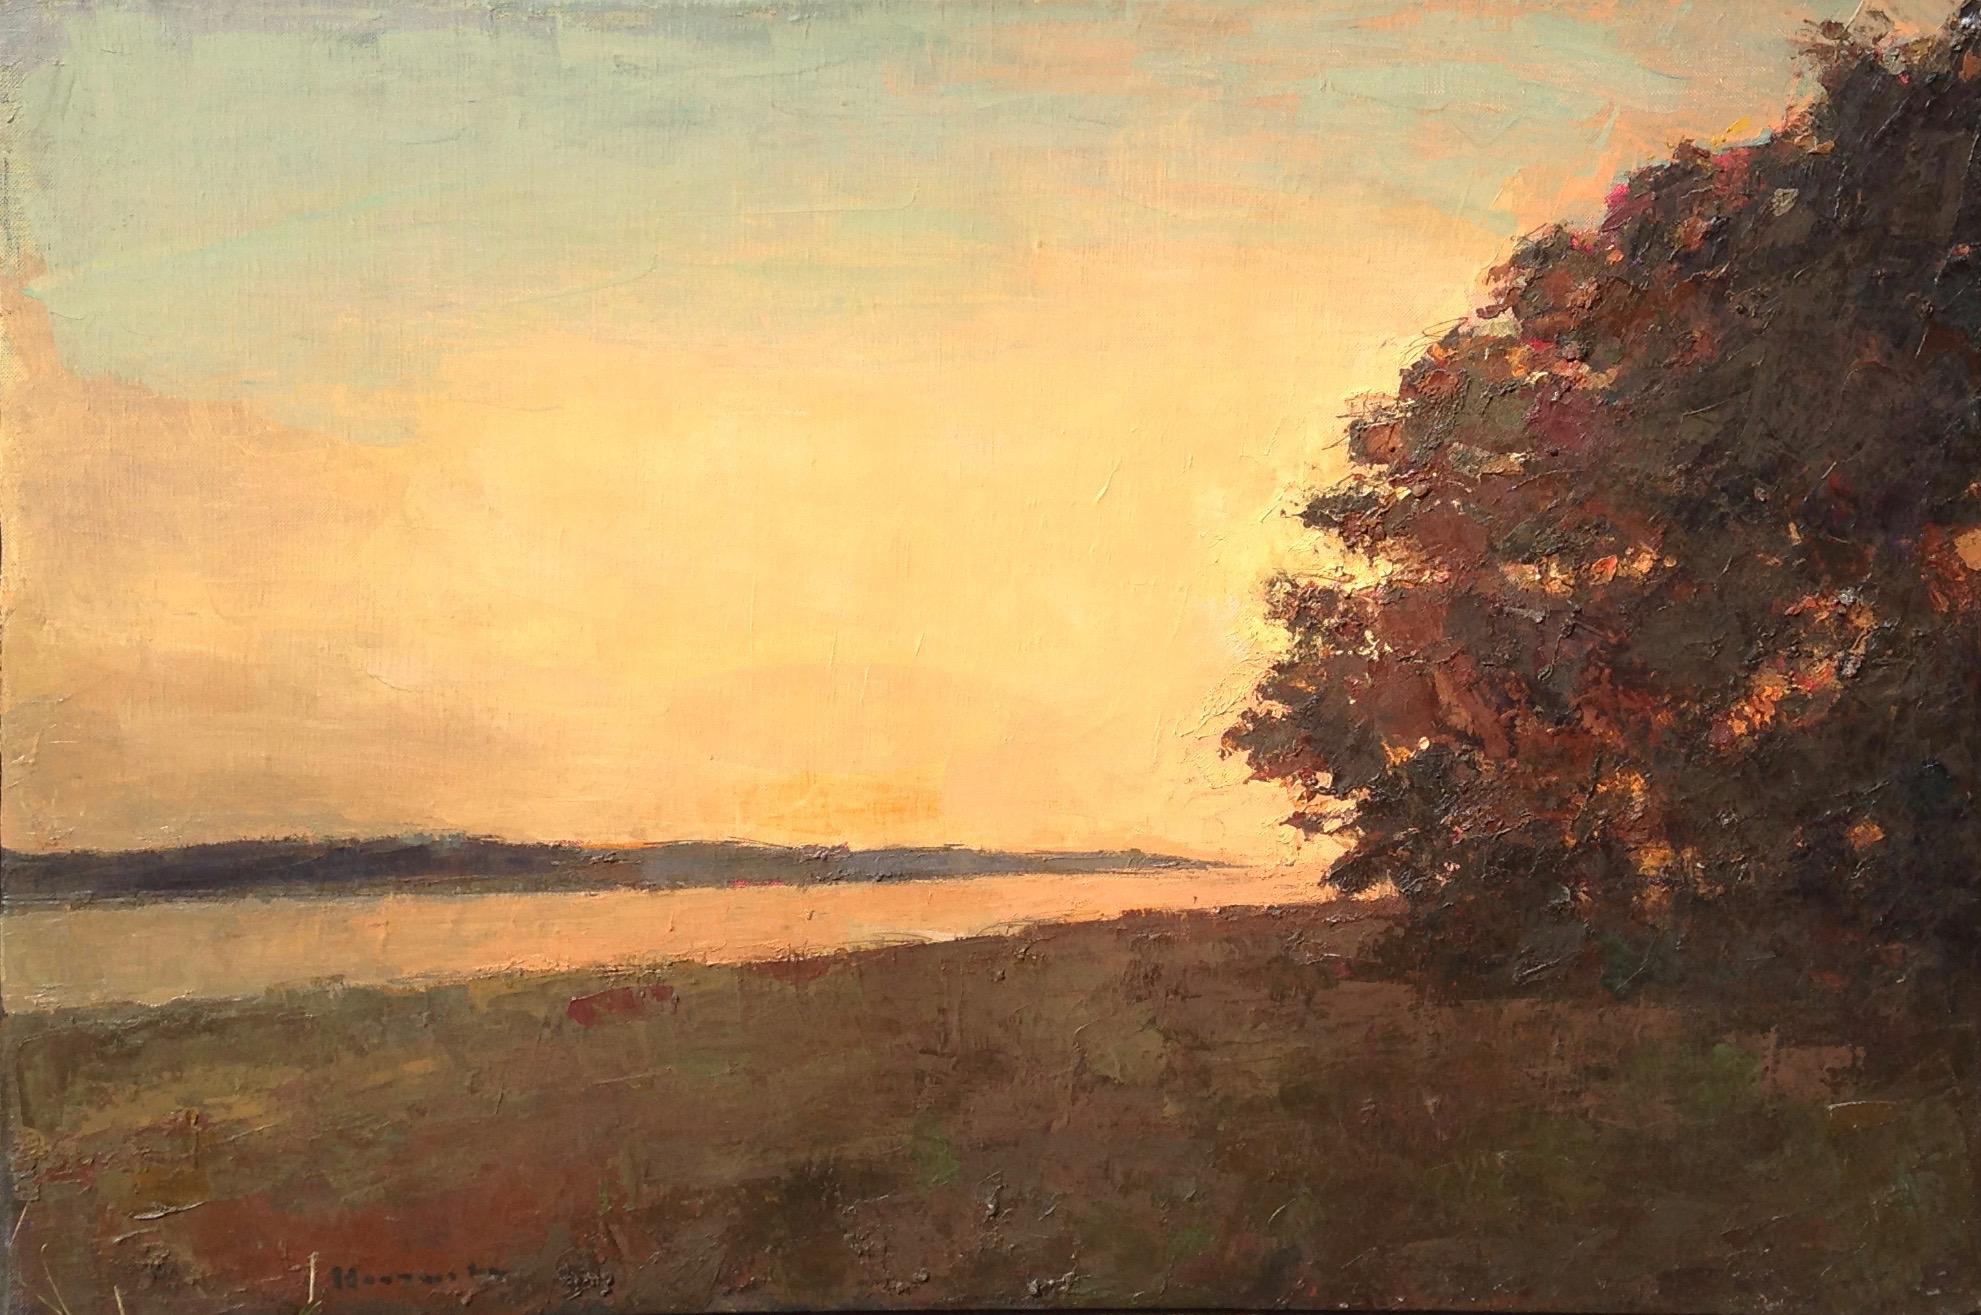 ''Bend in the Trail Sepia'' oil painting of a yellow sunset landscape with tree 